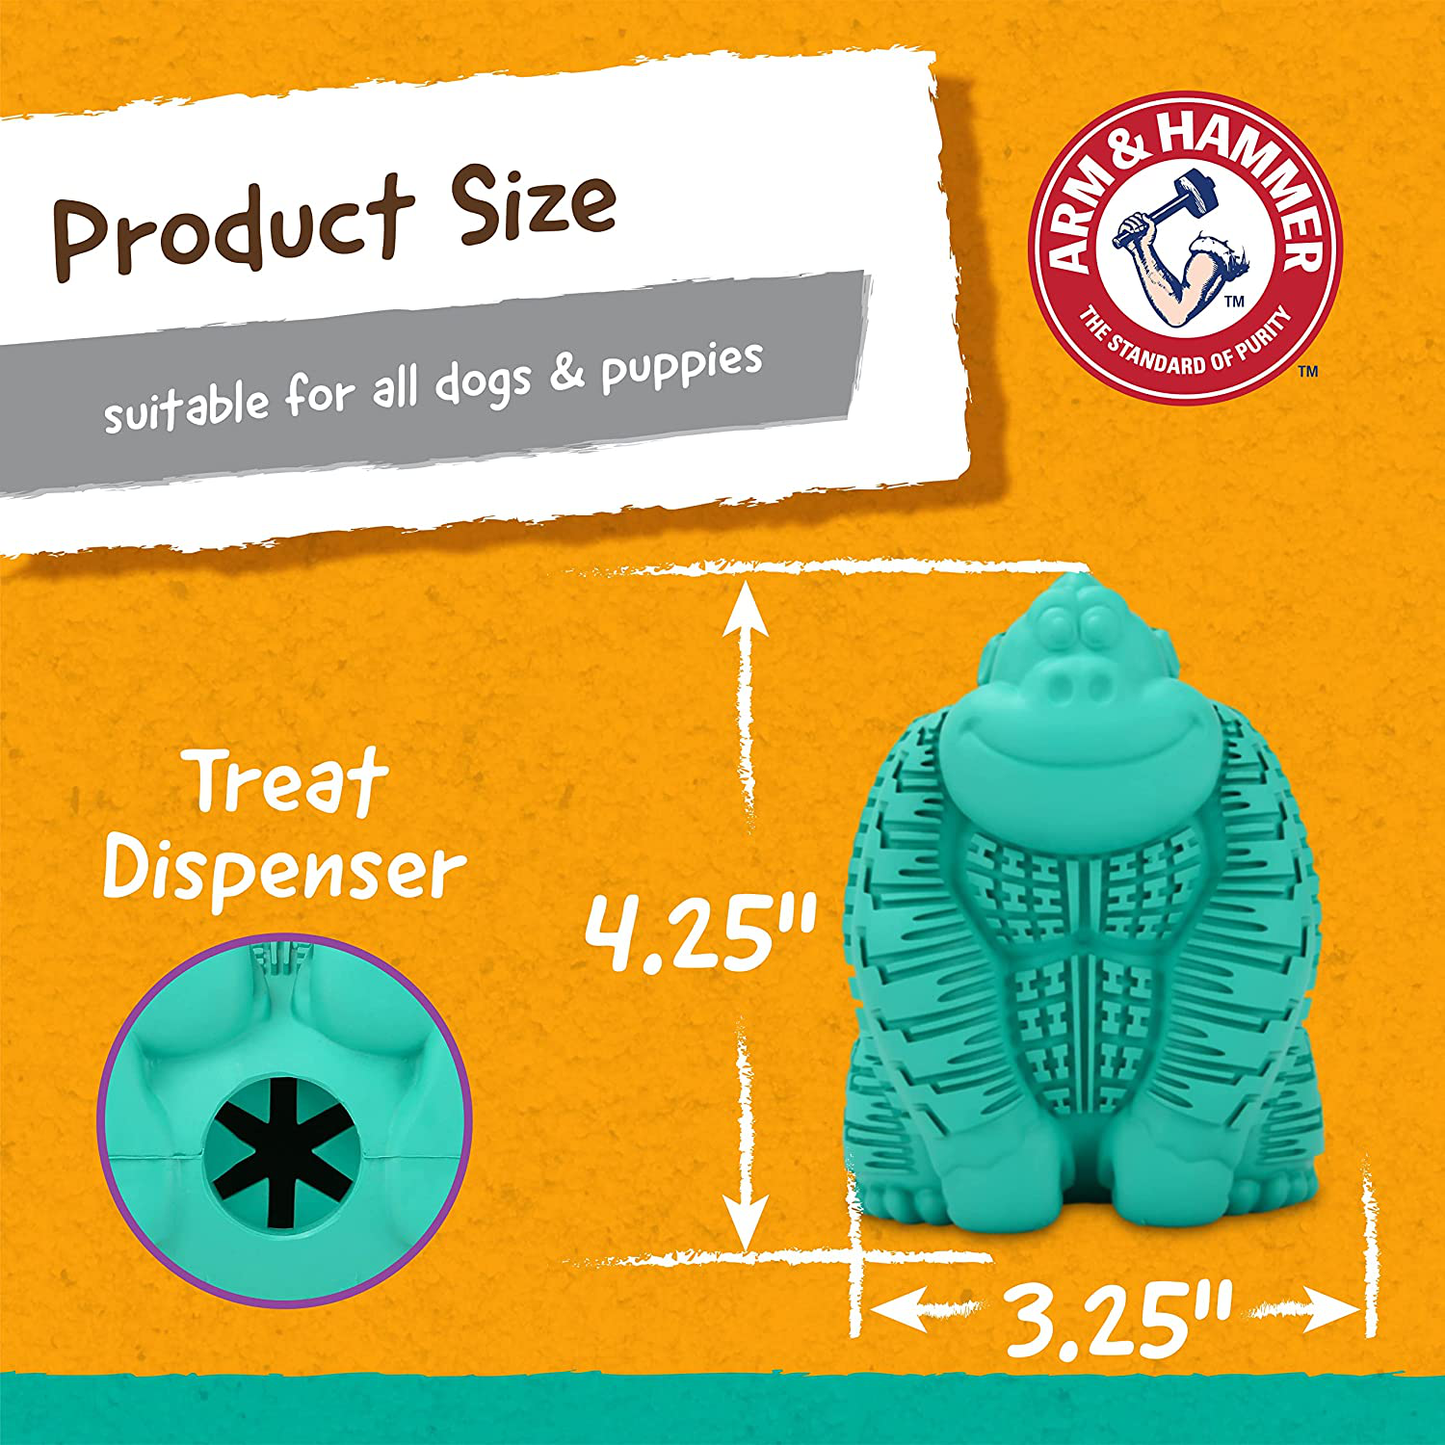 Arm & Hammer for Pets Super Treadz Dental Chew Toy for Dogs - Dog Dental Chew Toys Reduce Plaque & Tartar - Dog Chew Toys from Arm and Hammer, Pet Chew Toys for Dogs Animals & Pet Supplies > Pet Supplies > Dog Supplies > Dog Toys Arm & Hammer   